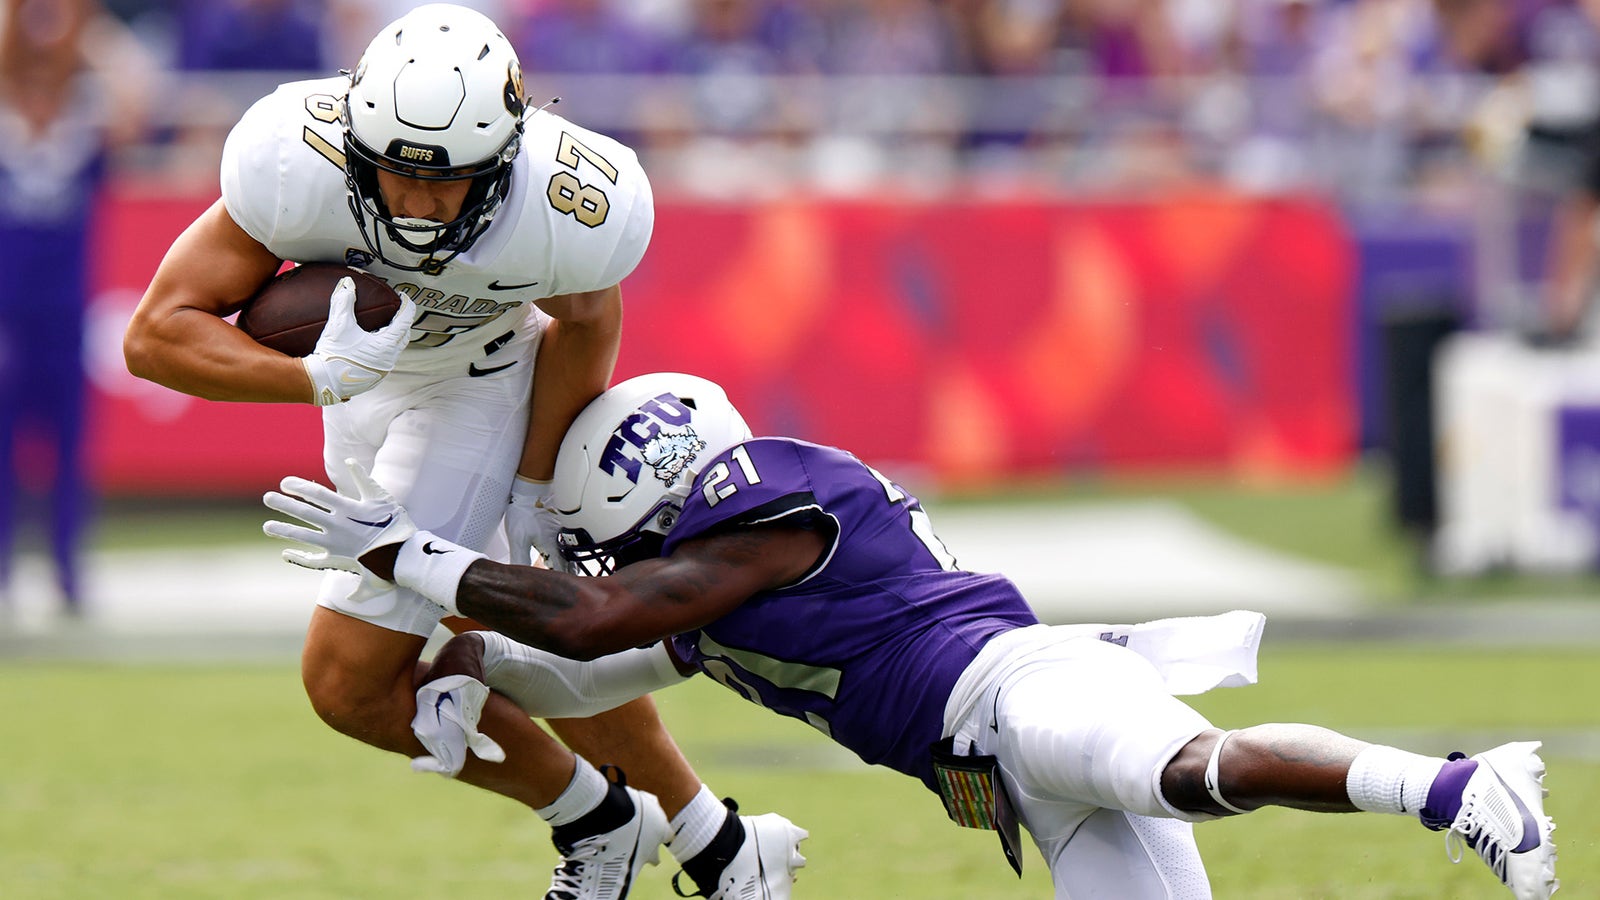 Highlights: All the best plays from wild Colorado-TCU game!